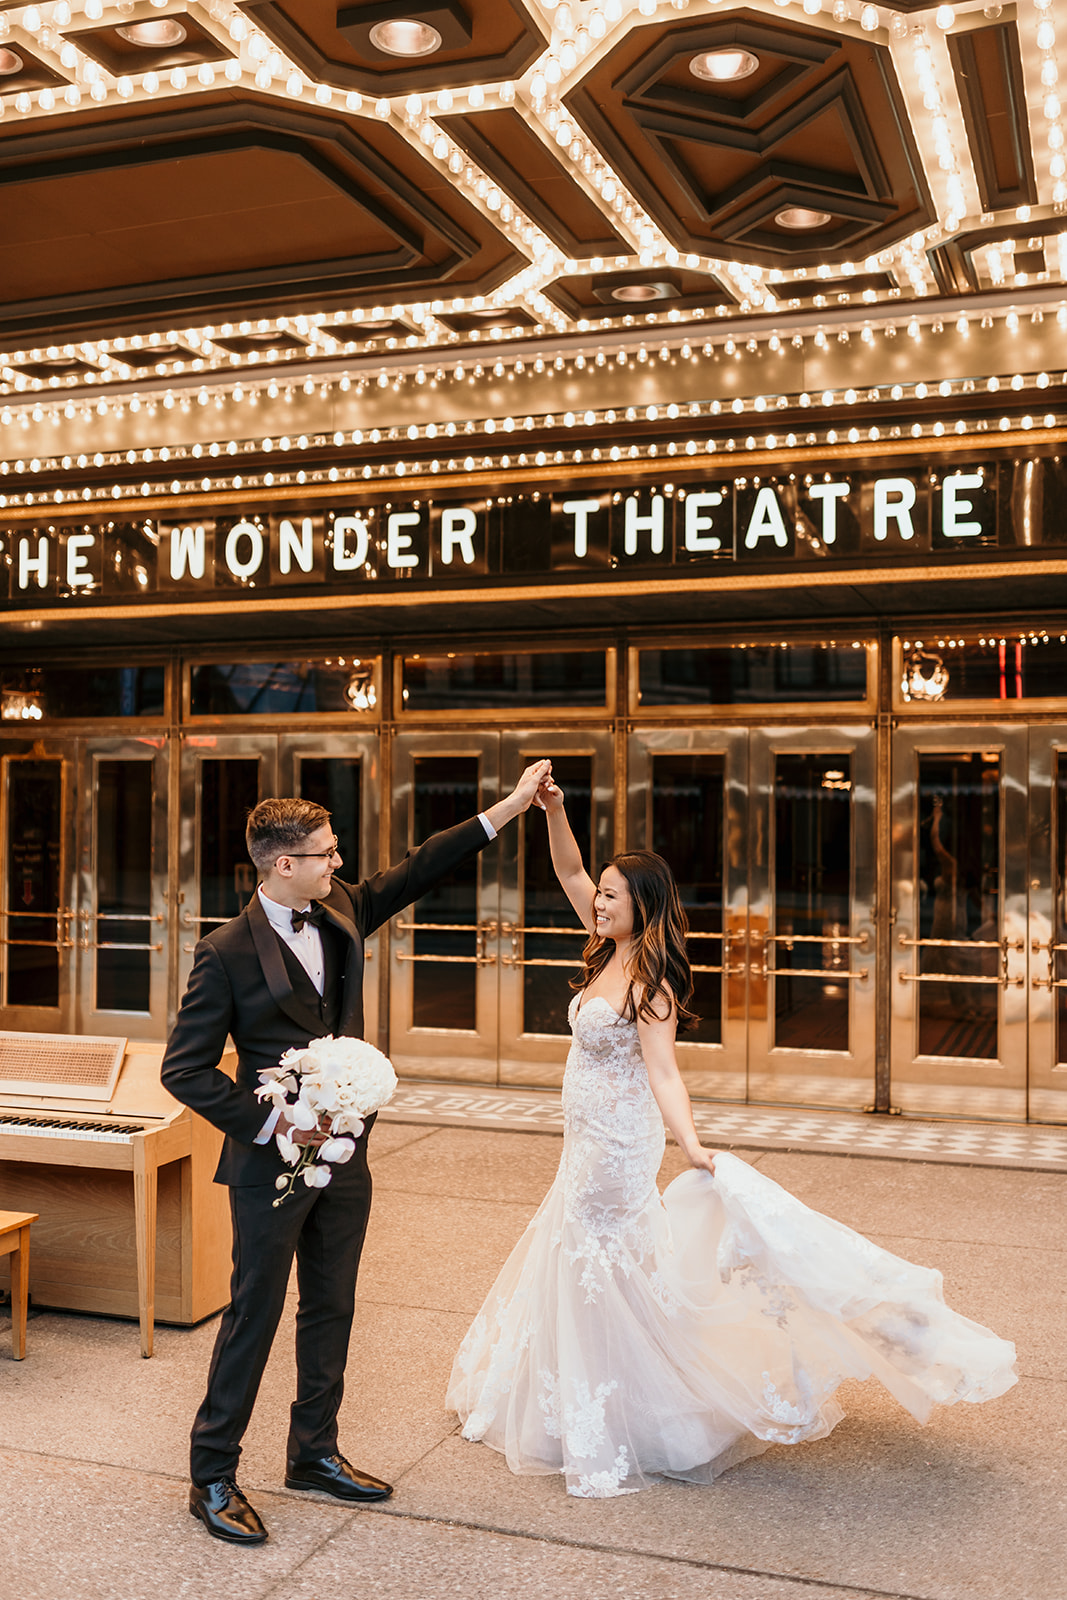 Classic wedding at the Curtiss Hotel downtoan Buffalo, NY